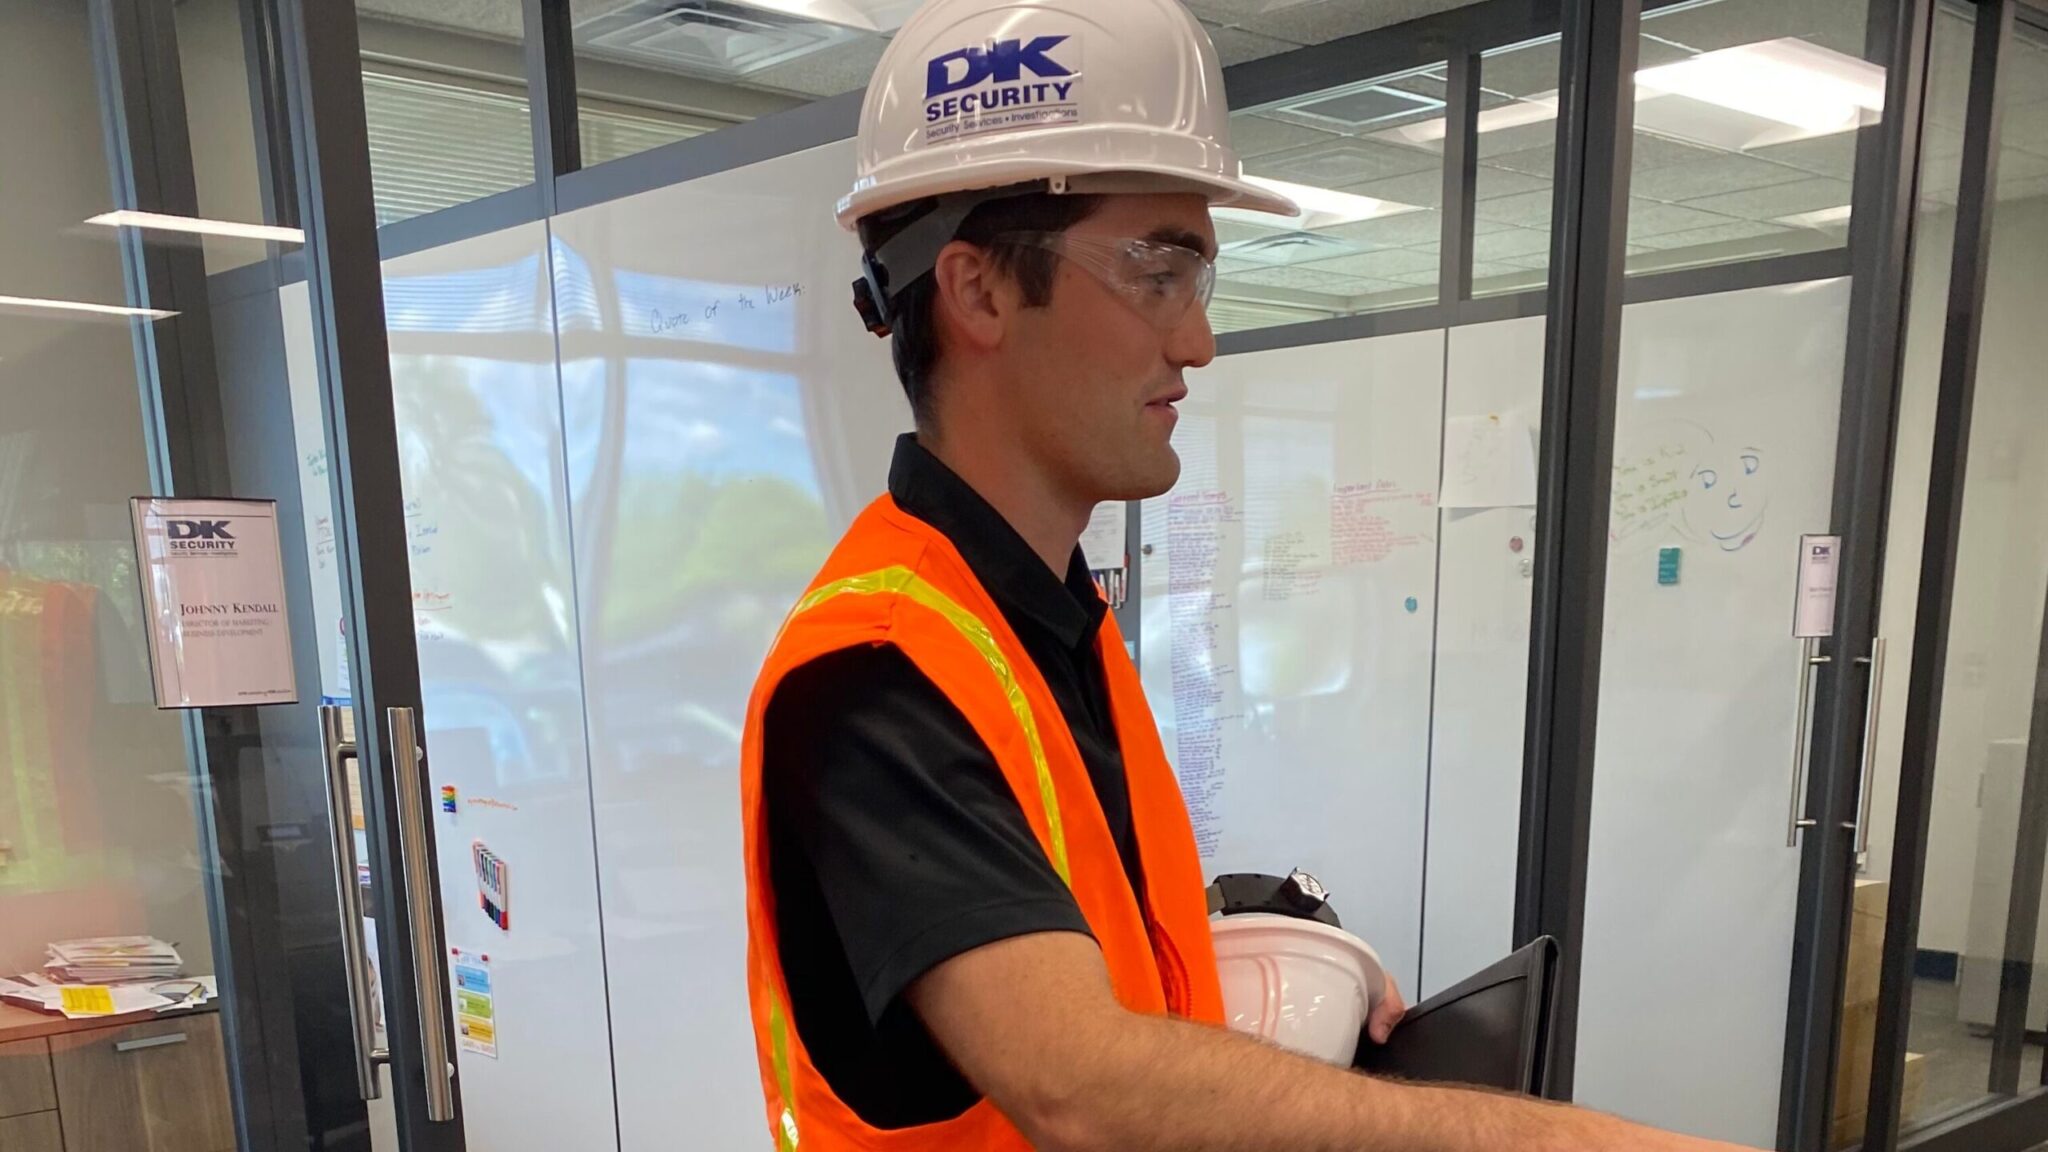 Johnny Kendall stands in the workroom of DK Security's Grand Rapids headquarters adorned with a company safety helmet, goggles, and reflective vest, prior to visiting a client site.